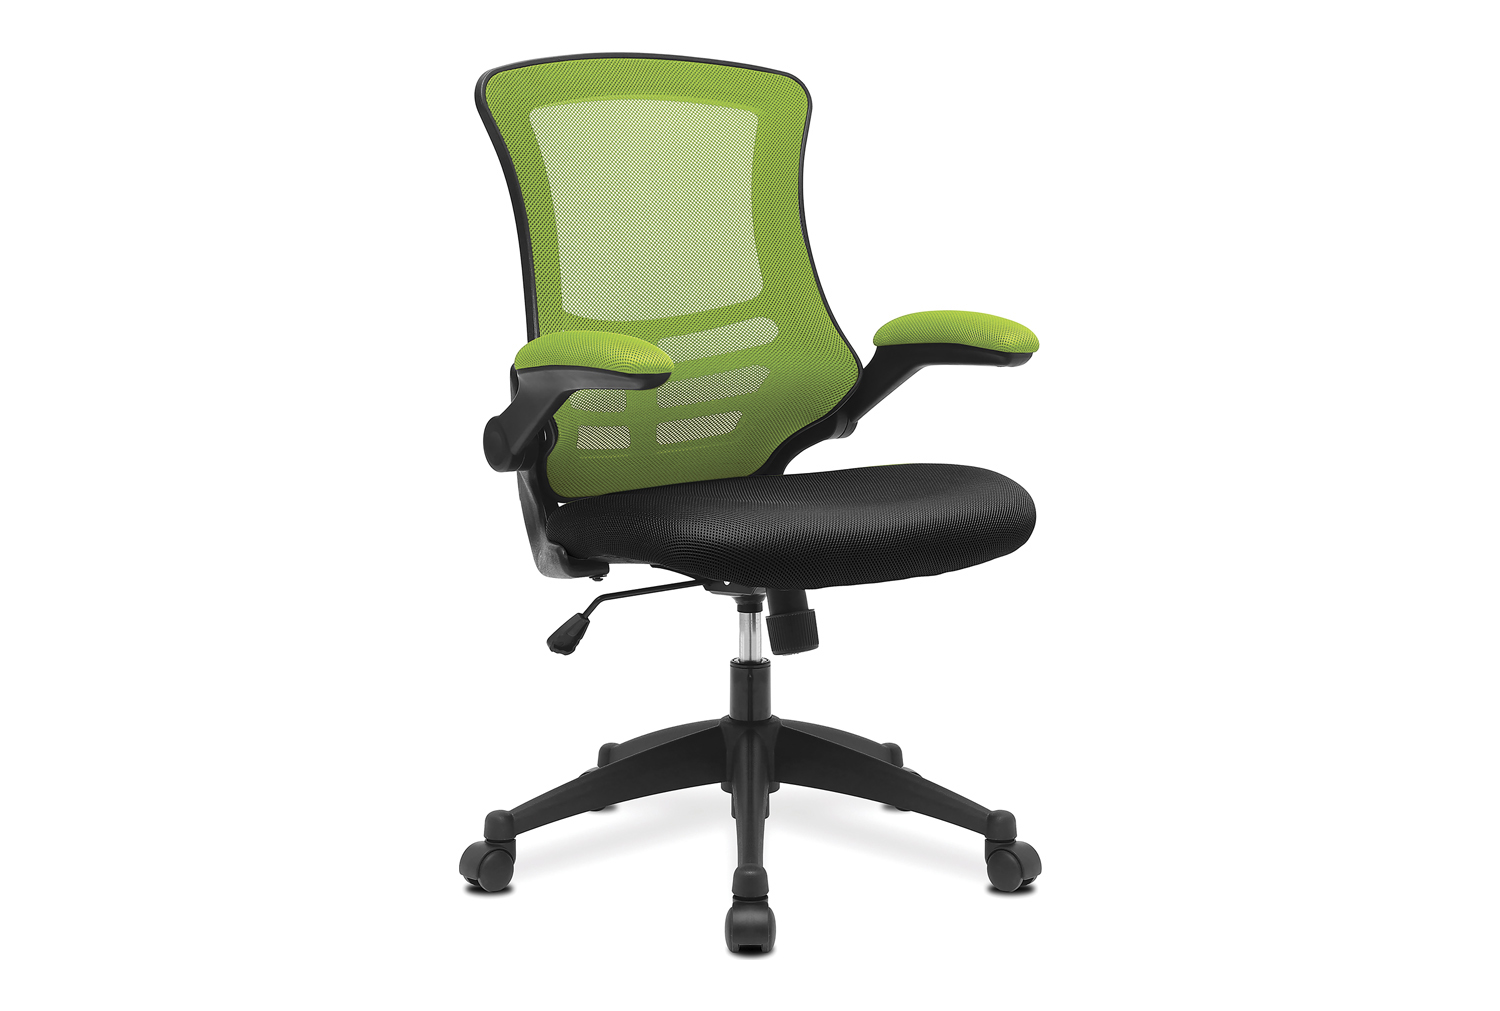 Moon High Mesh Back Operator Office Chair With Black Base (Lime Green/Black), Fully Installed